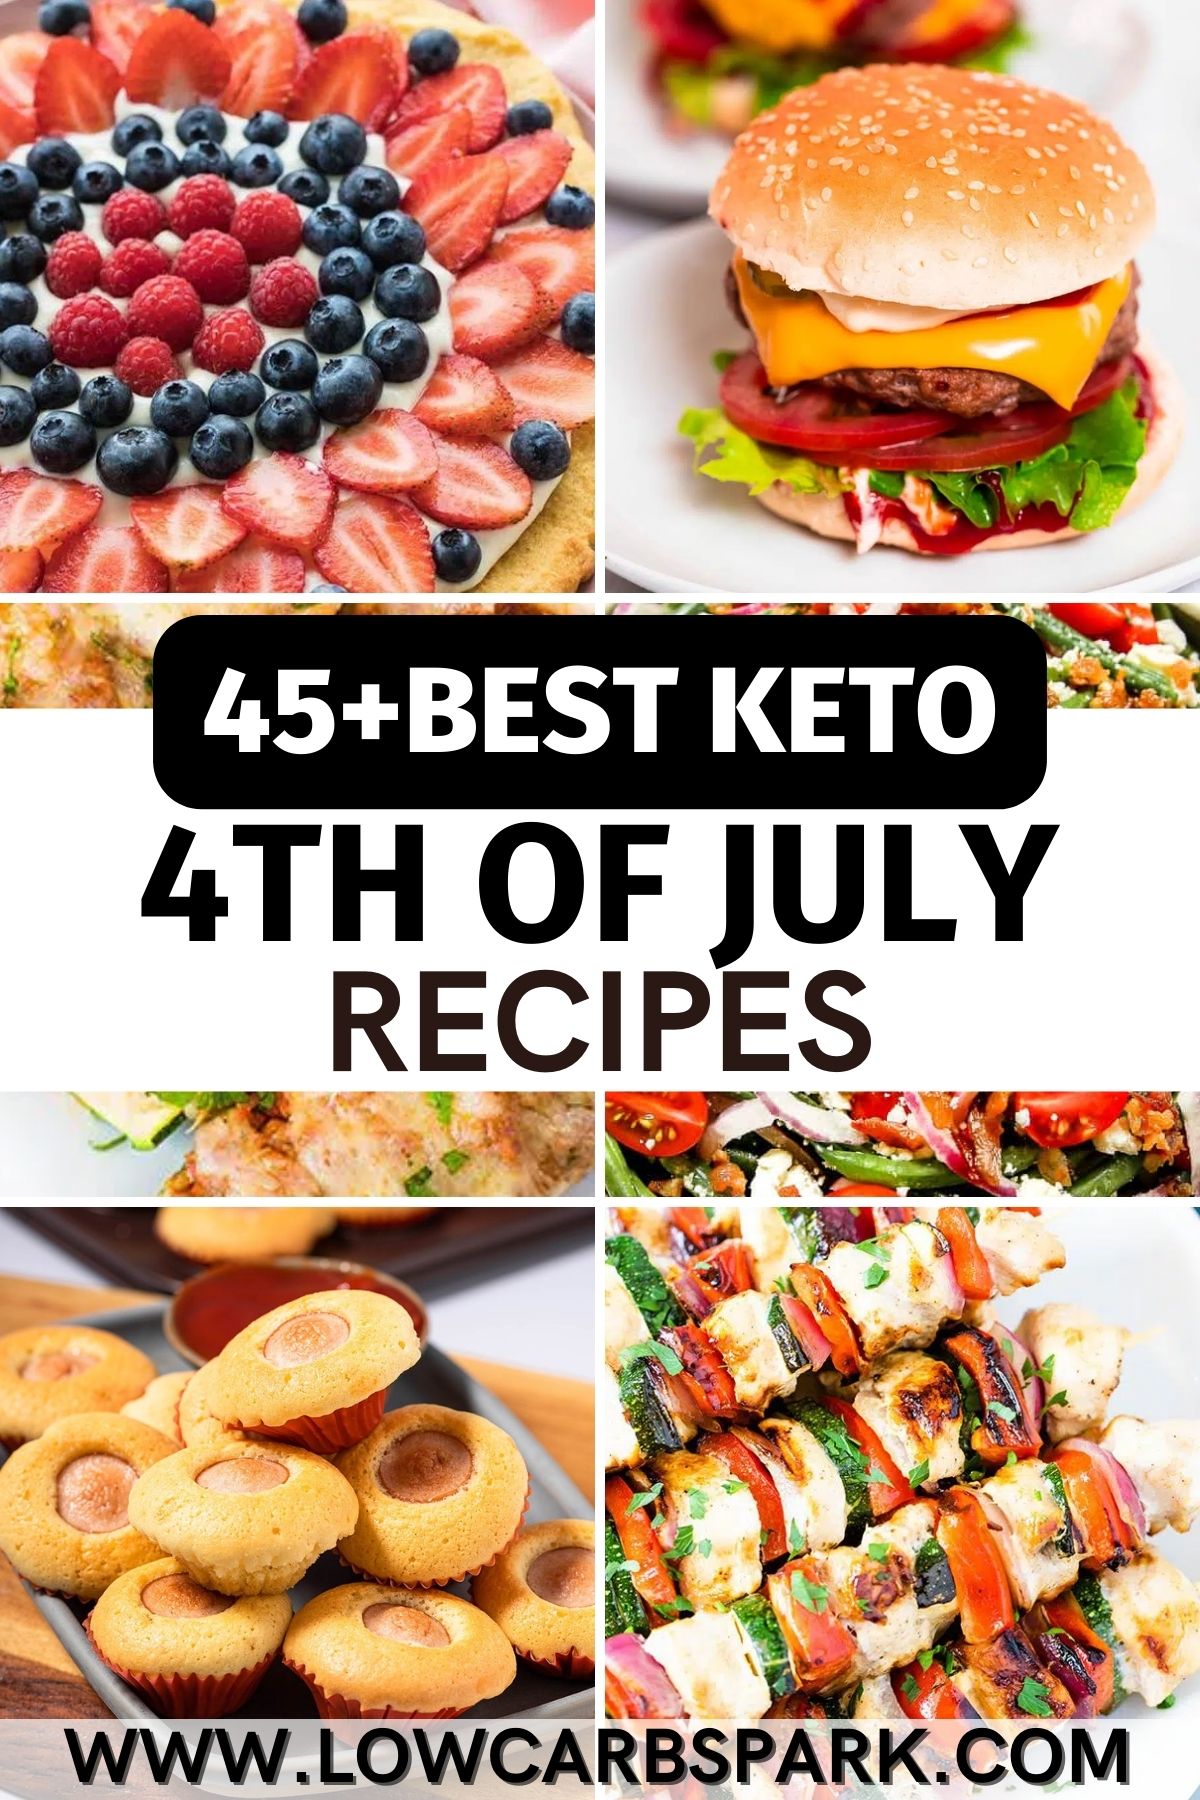 45+ Best Keto 4th of July Recipes